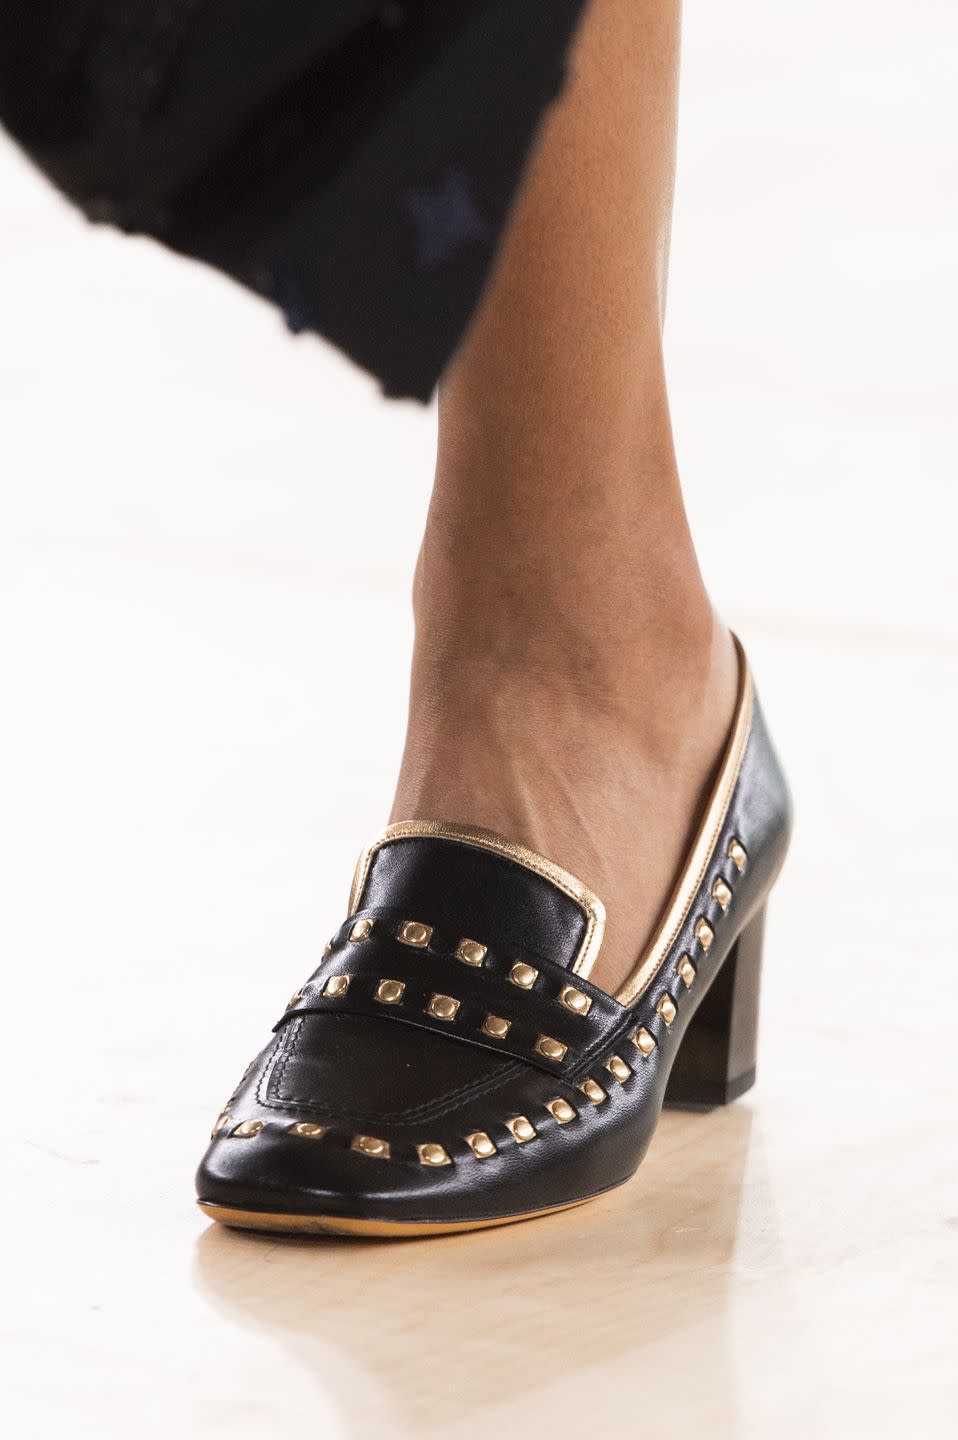 36) Dressy Loafers